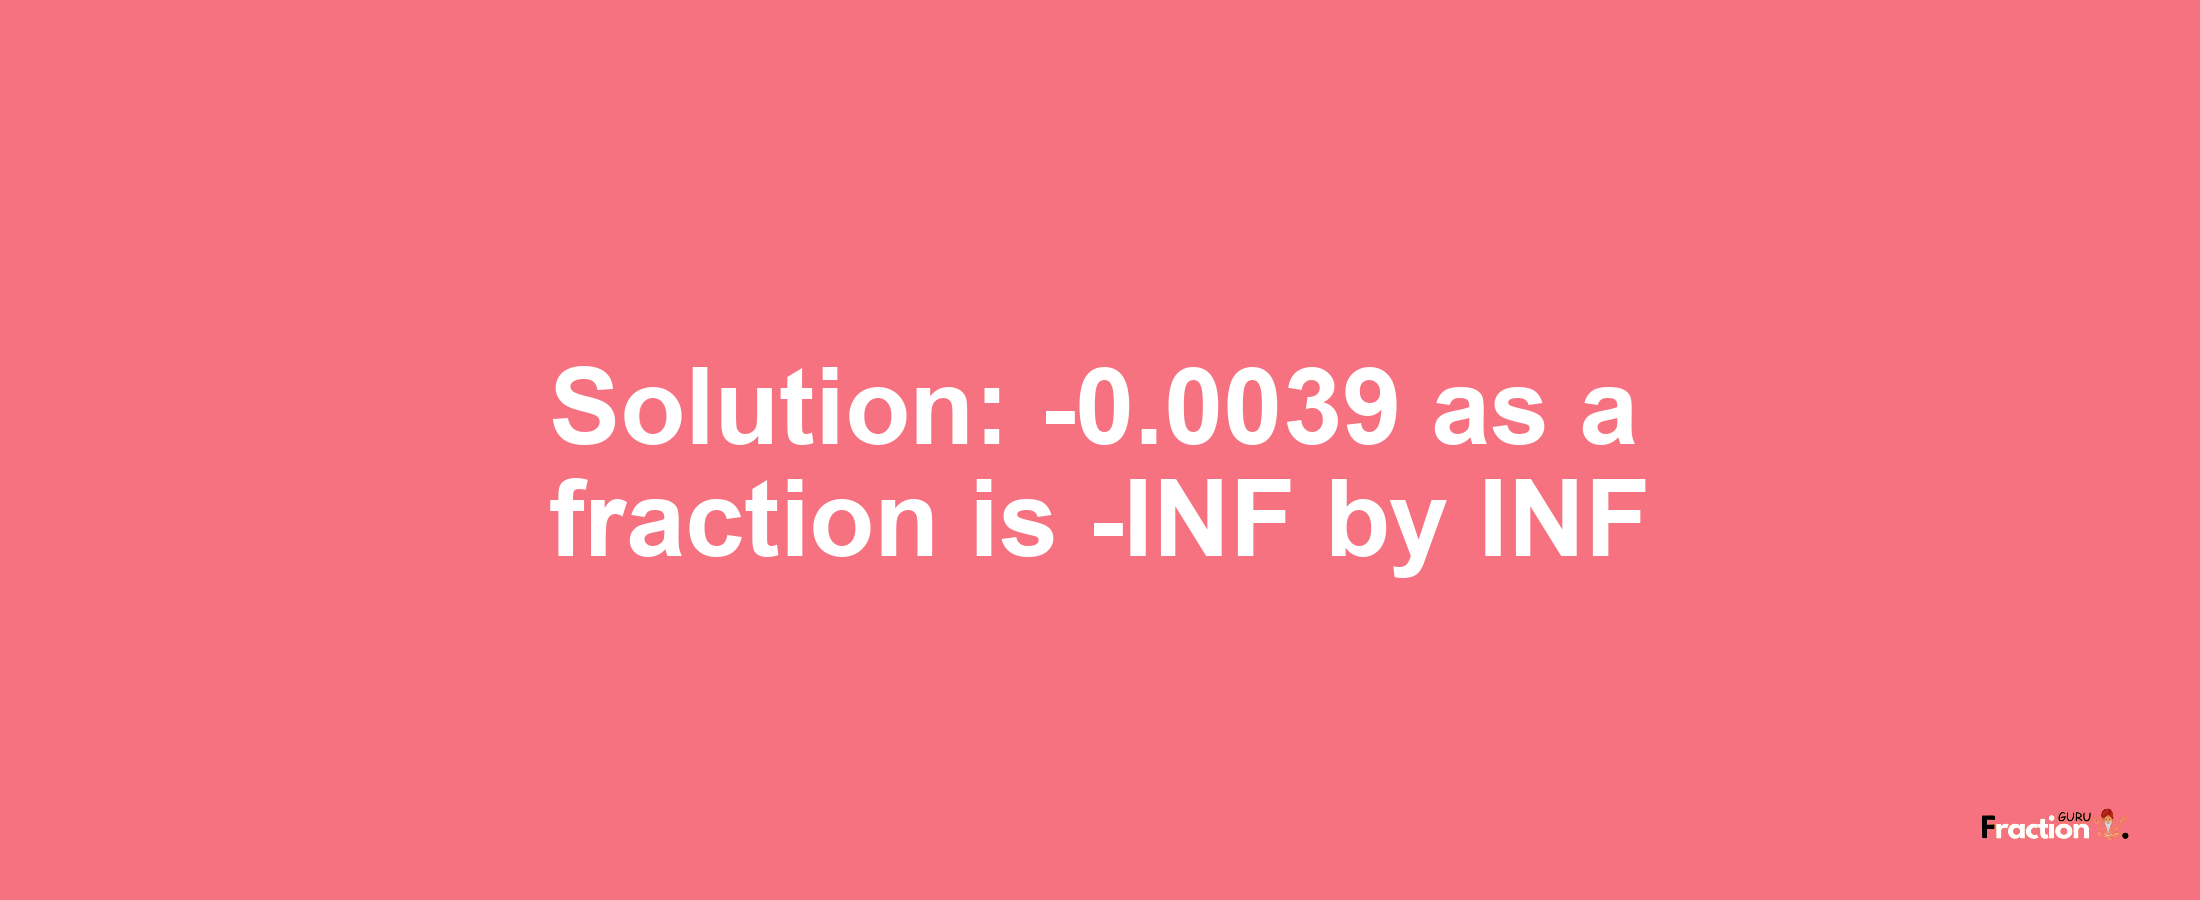 Solution:-0.0039 as a fraction is -INF/INF